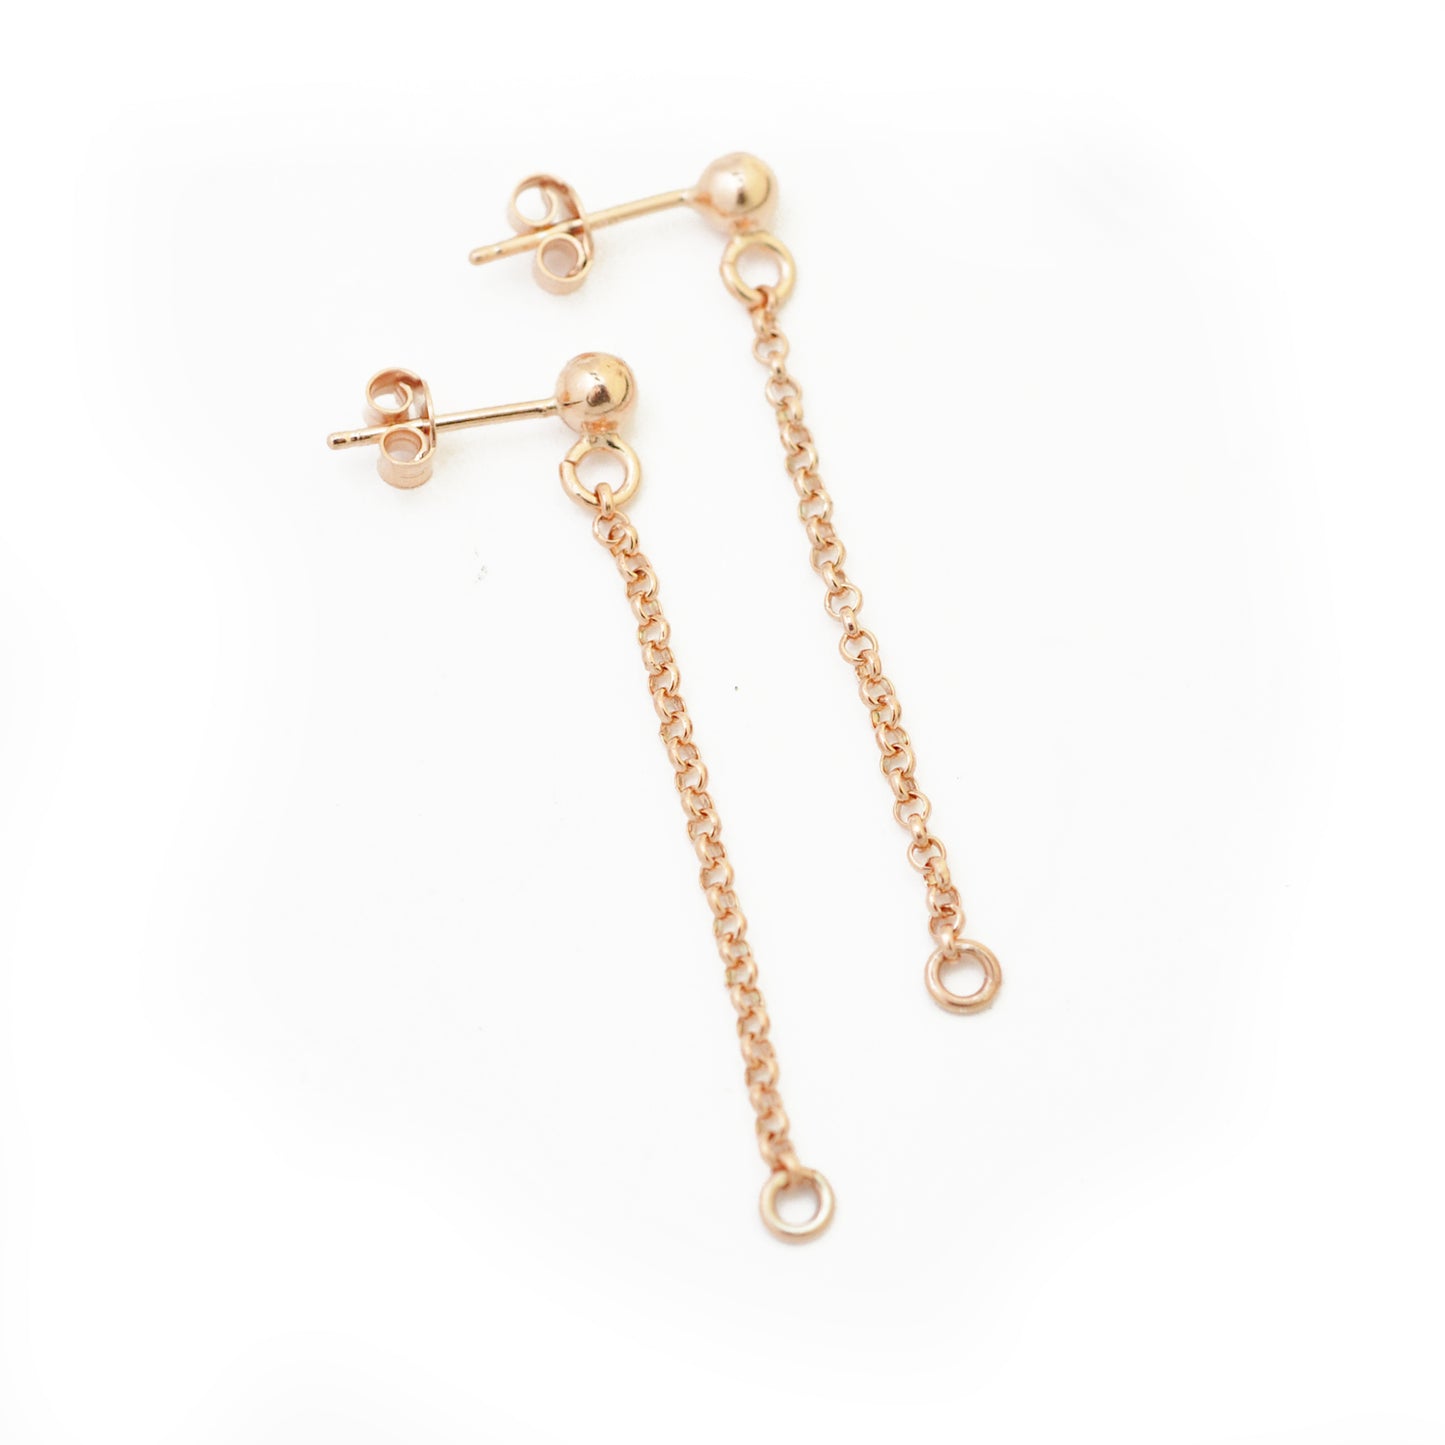 Ear studs with chain &amp; eyelet / 925 silver 18k rose gold plated / 4cm